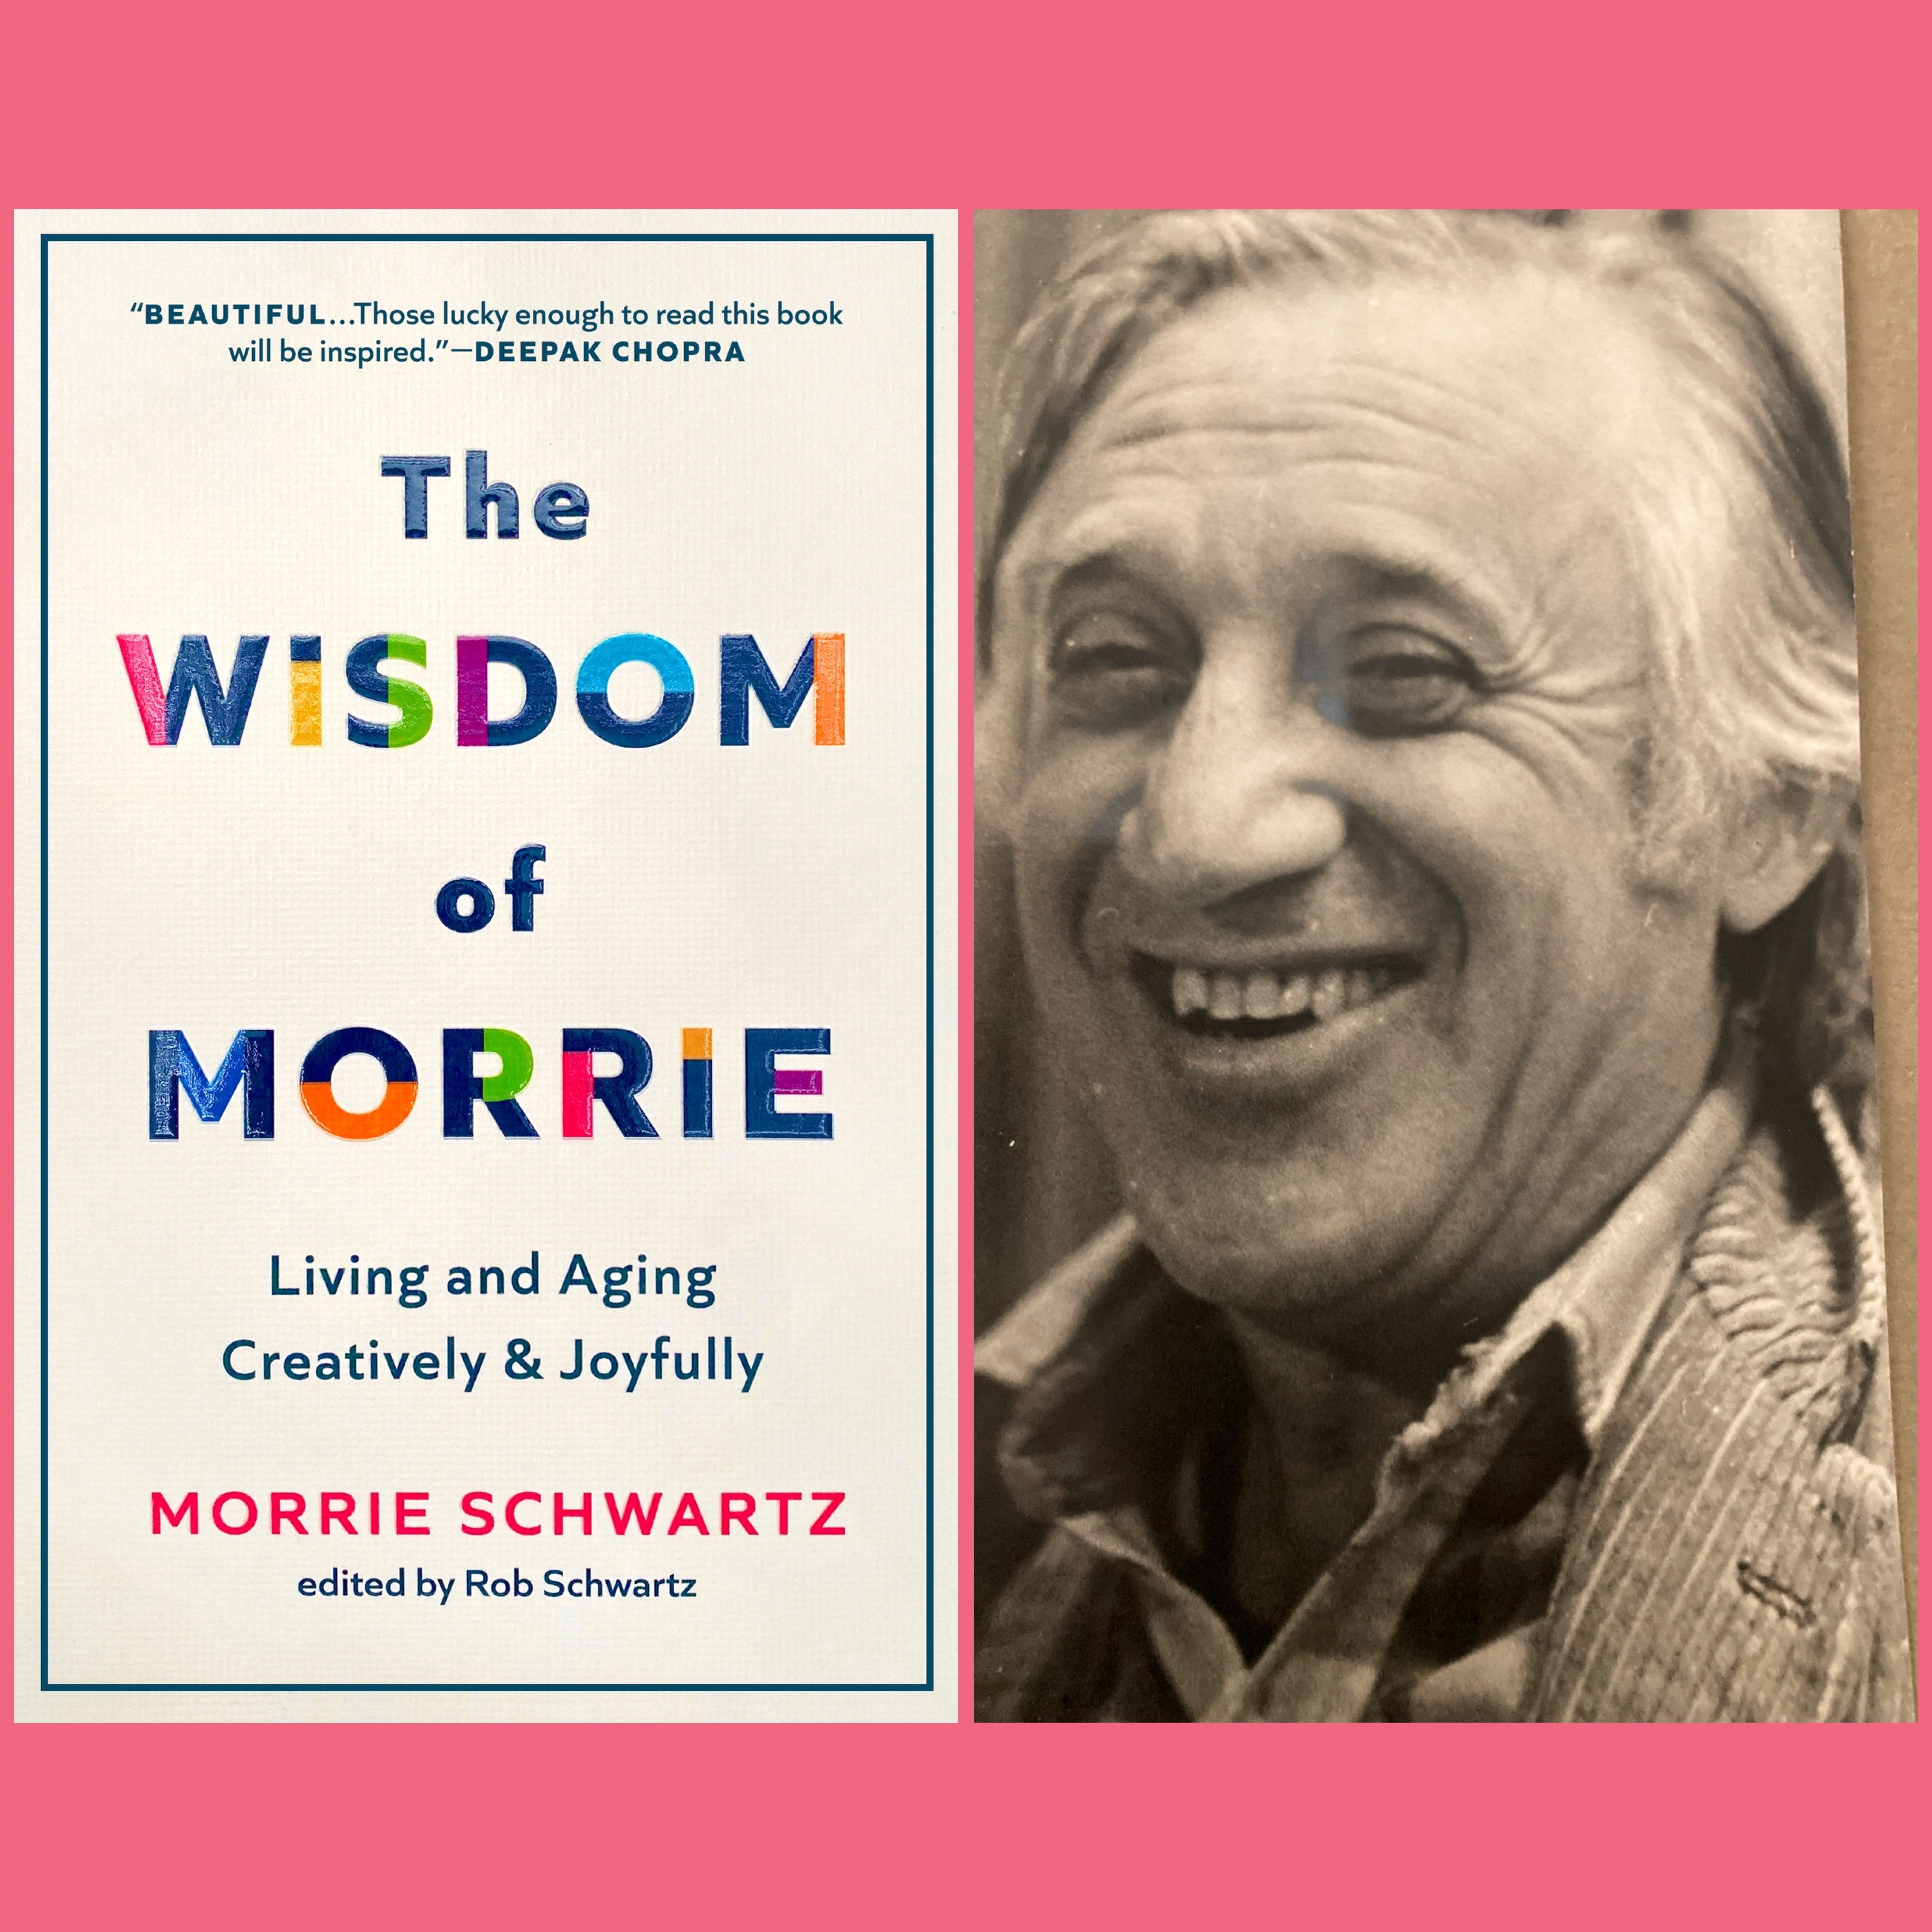 Join us for a Live Author Book Talk and Signing on Thurs July 20th at 6pm about "The Wisdom of Morrie" at Zibby's Bookshop Santa Monica with Son/Editor Rob Schwartz about new book by Morrie Schwartz